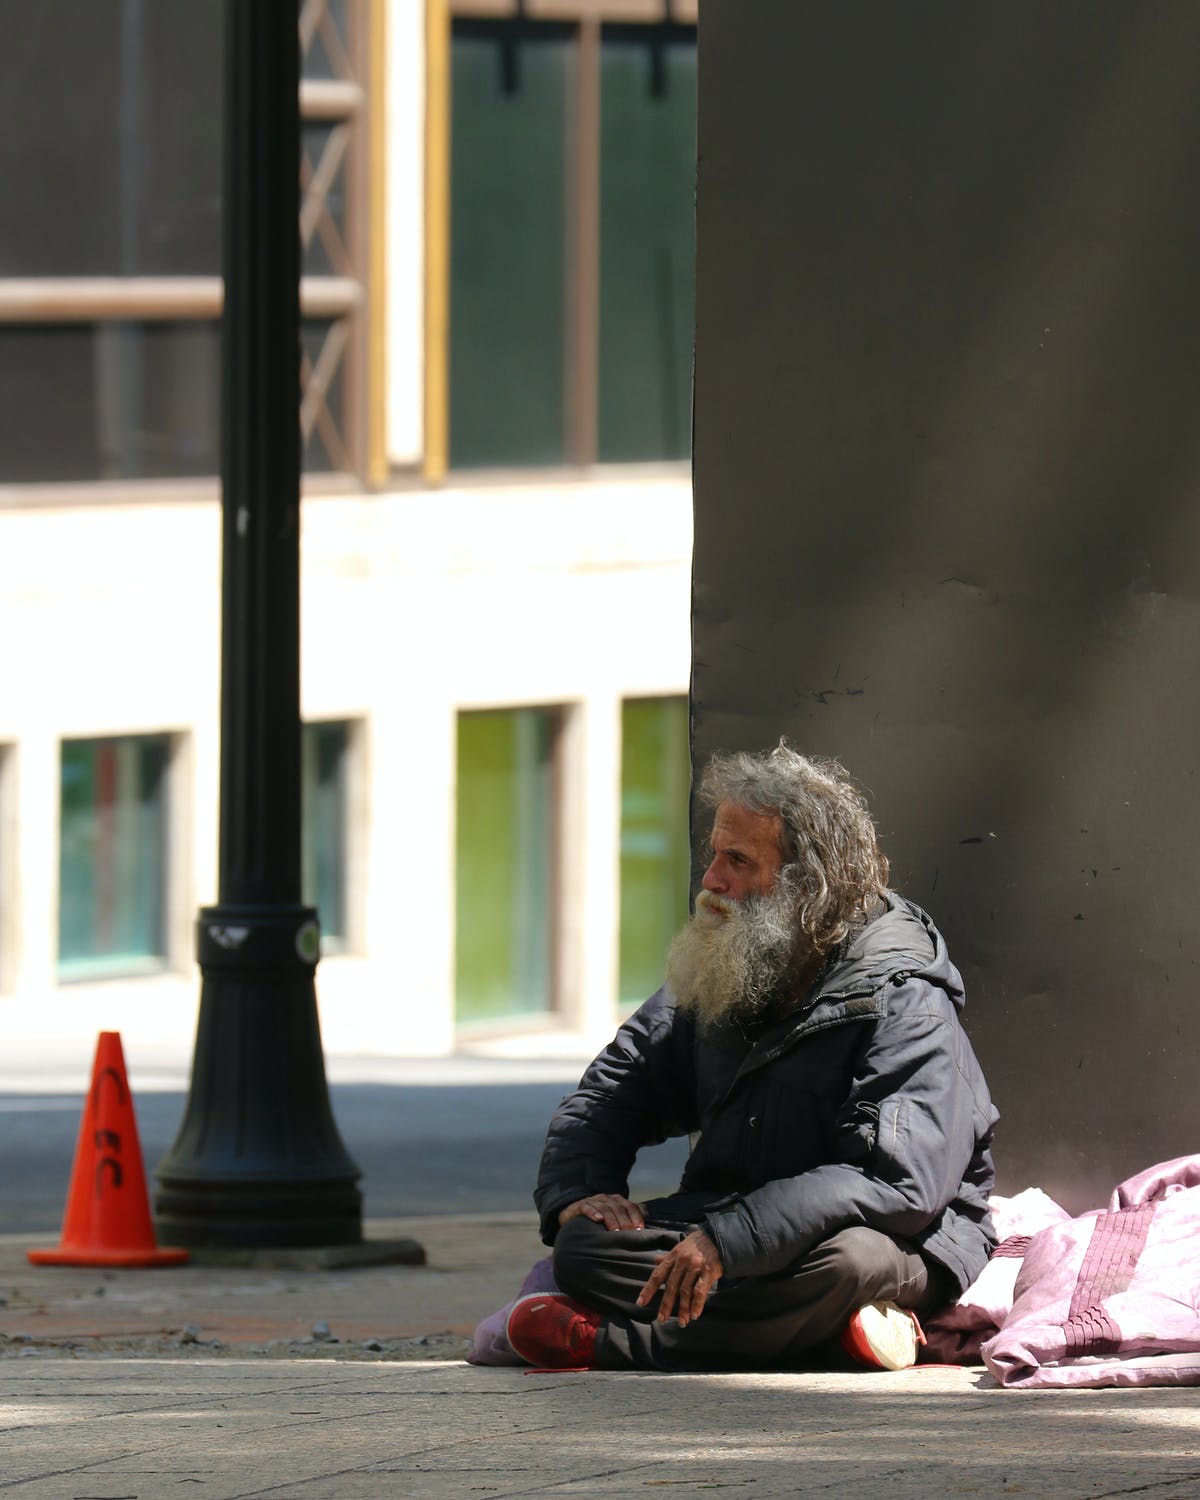 A homeless man had taken up residence by the side of the main door | Source: Pexels